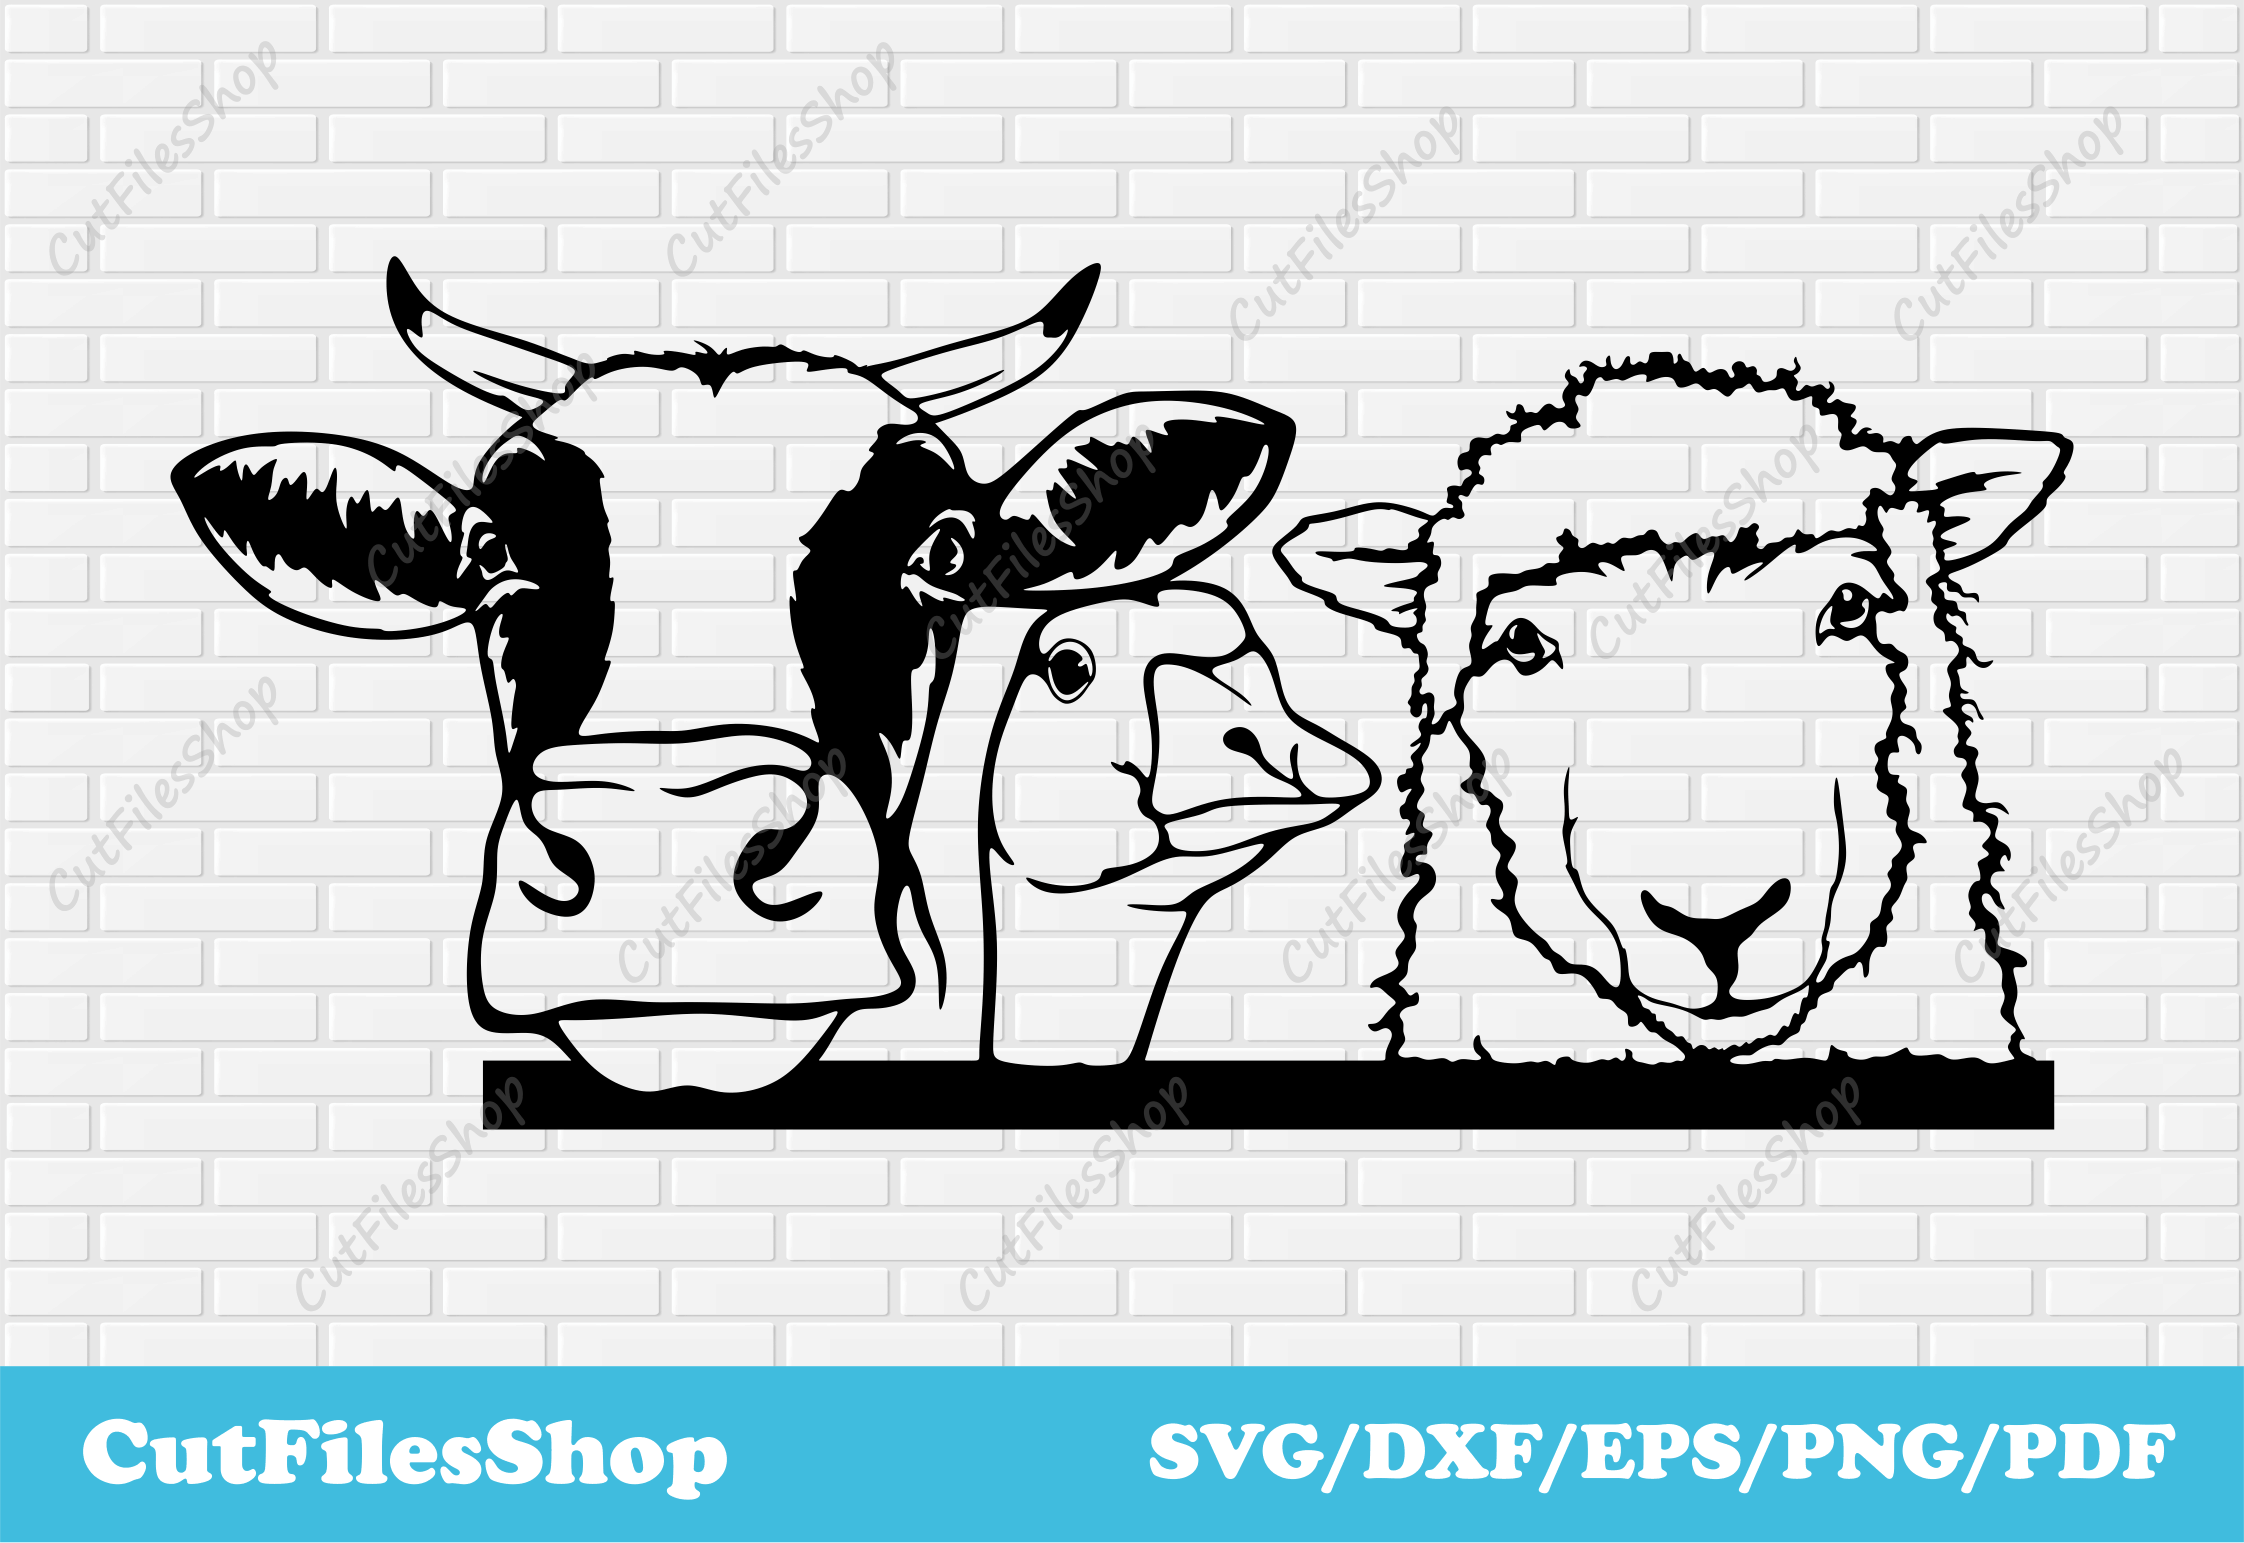 Moo Moo I'm Two SVG. PNG. Cow. Cricut Cut Files, Silhouette. Great for  onesies, shirts. Farm animals. DXF, eps. Instant download.